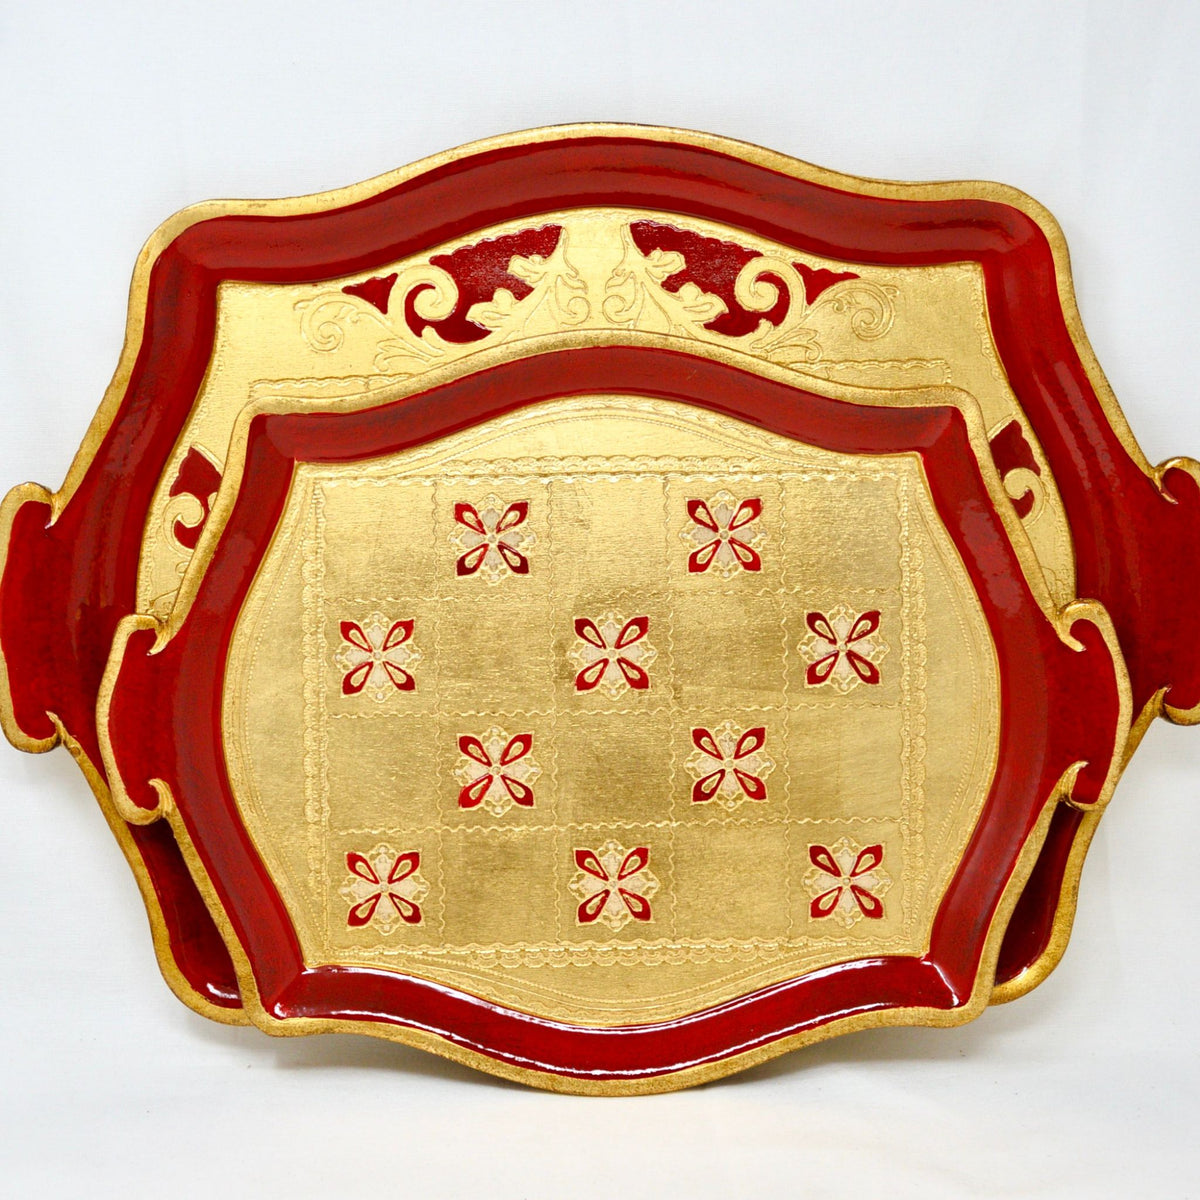 Florentine Carved Wood Tray, Large or Small, Red, Made in Italy - My Italian Decor